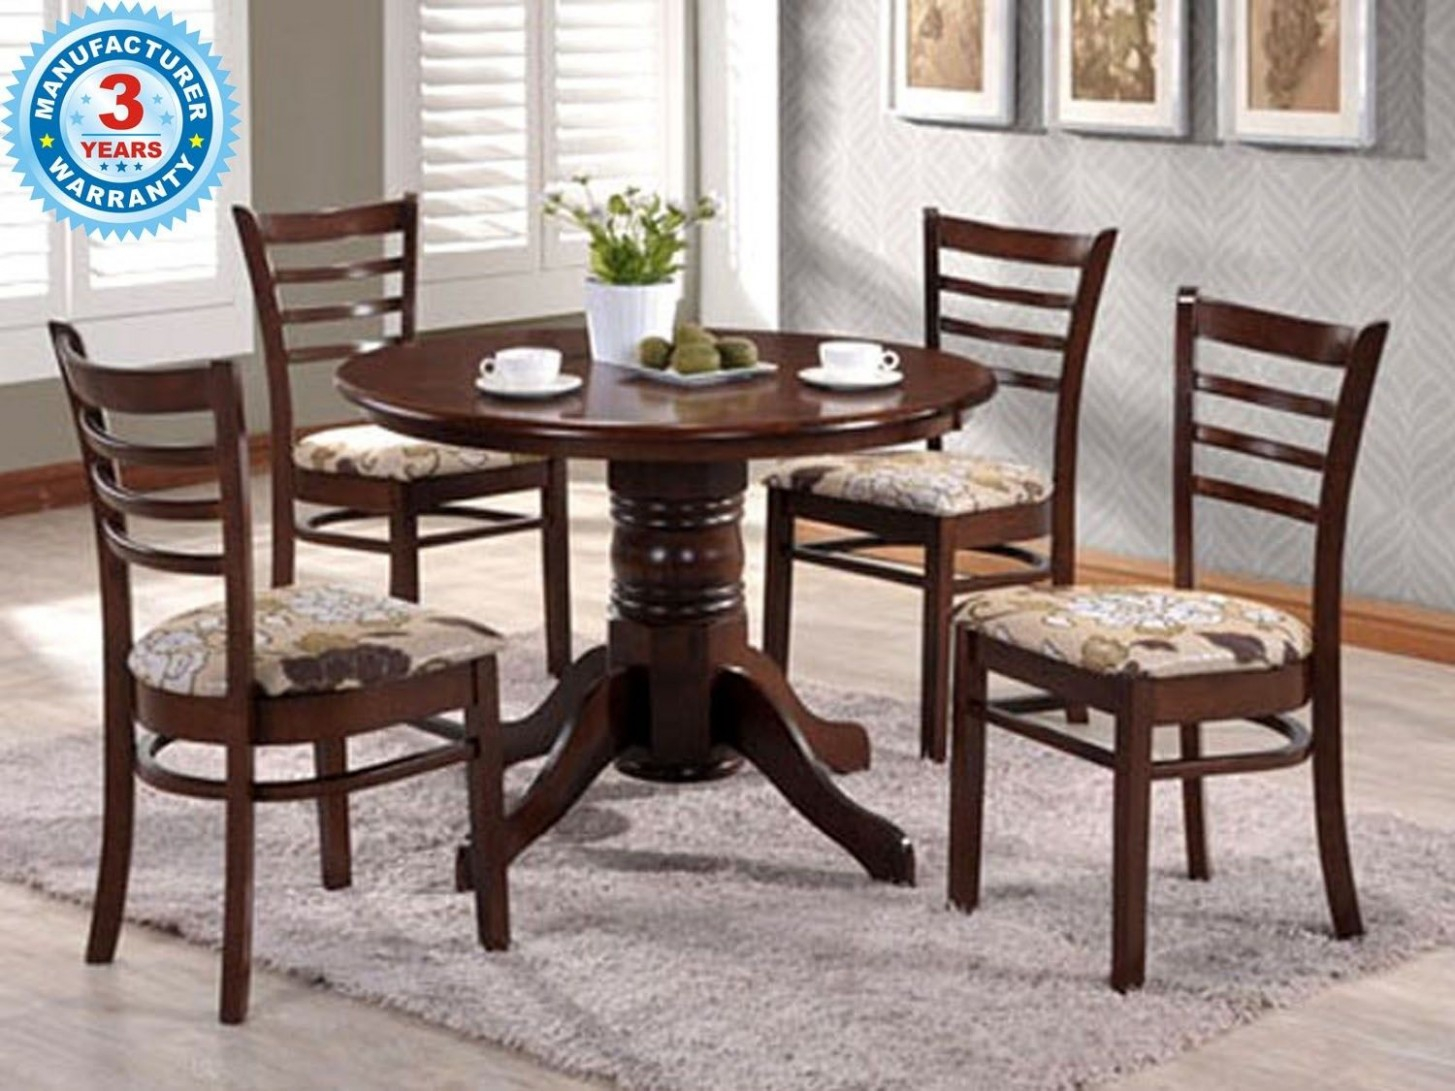 Center Table Design Olx Home And Furniture intended for dimensions 1455 X 1091